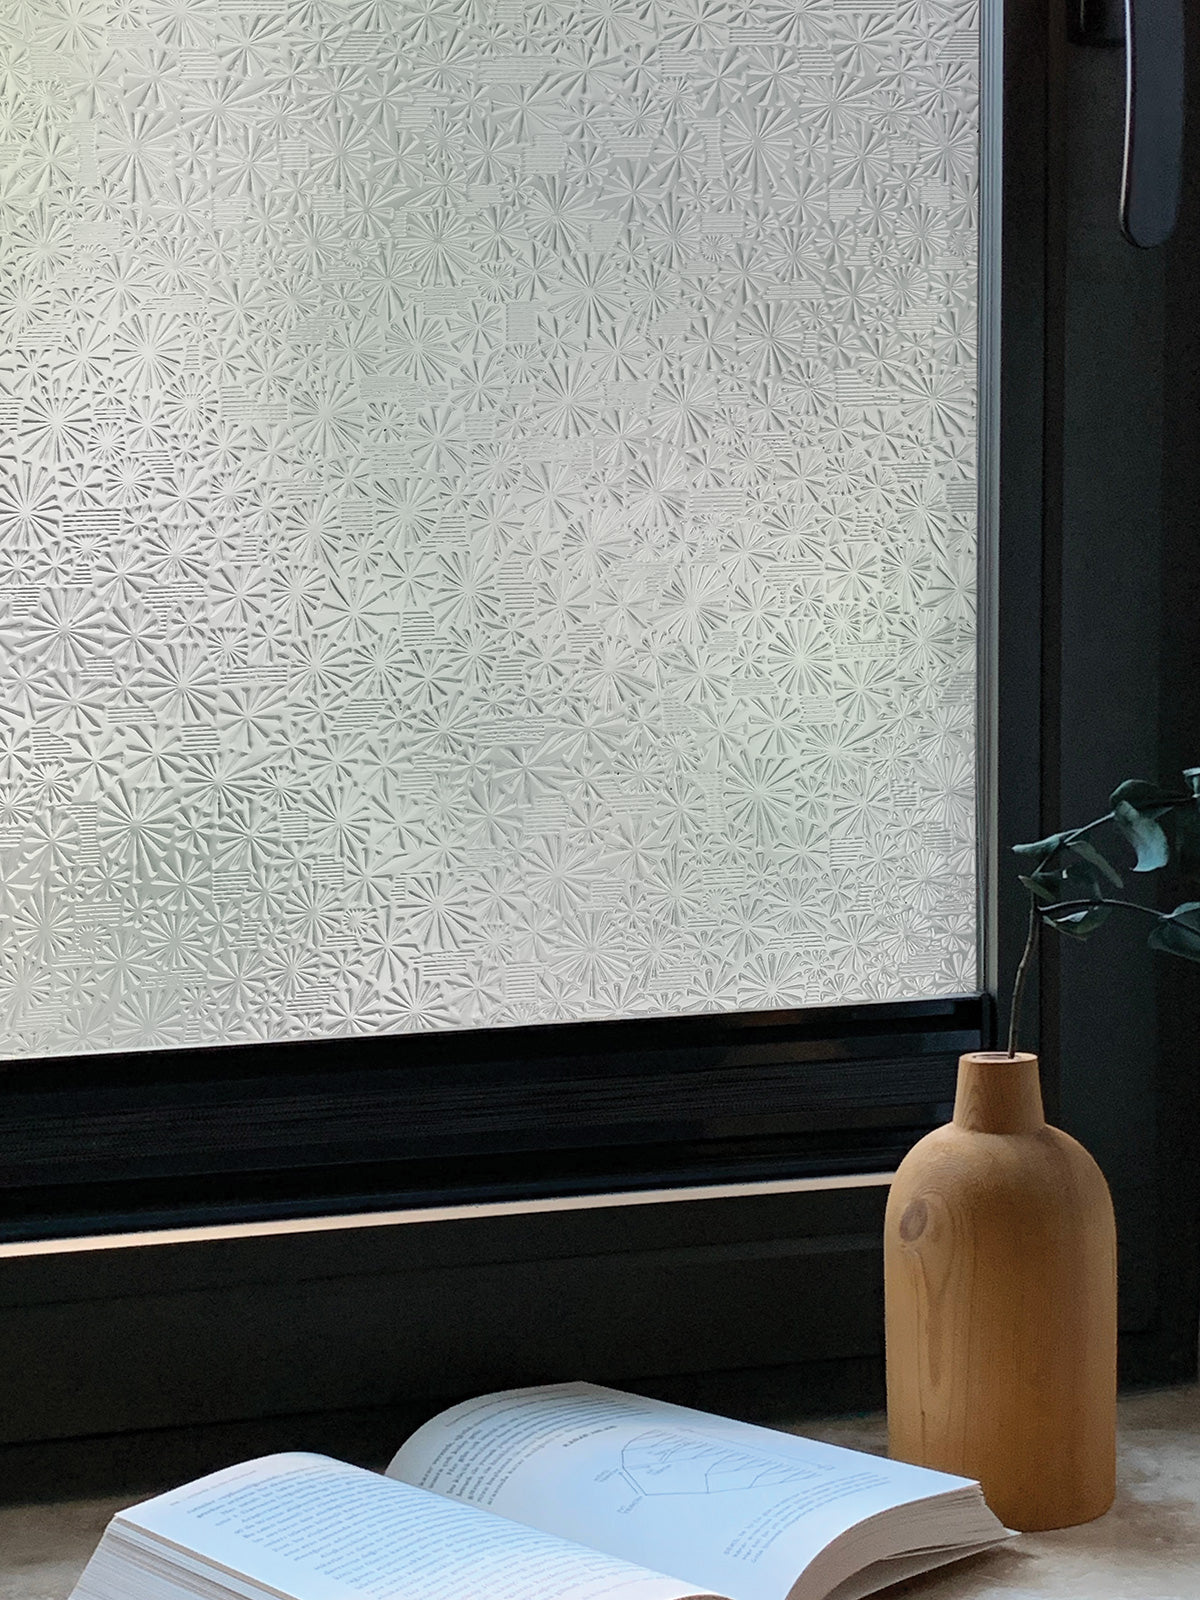 A range of Patterned Frosted Privacy Window film designs